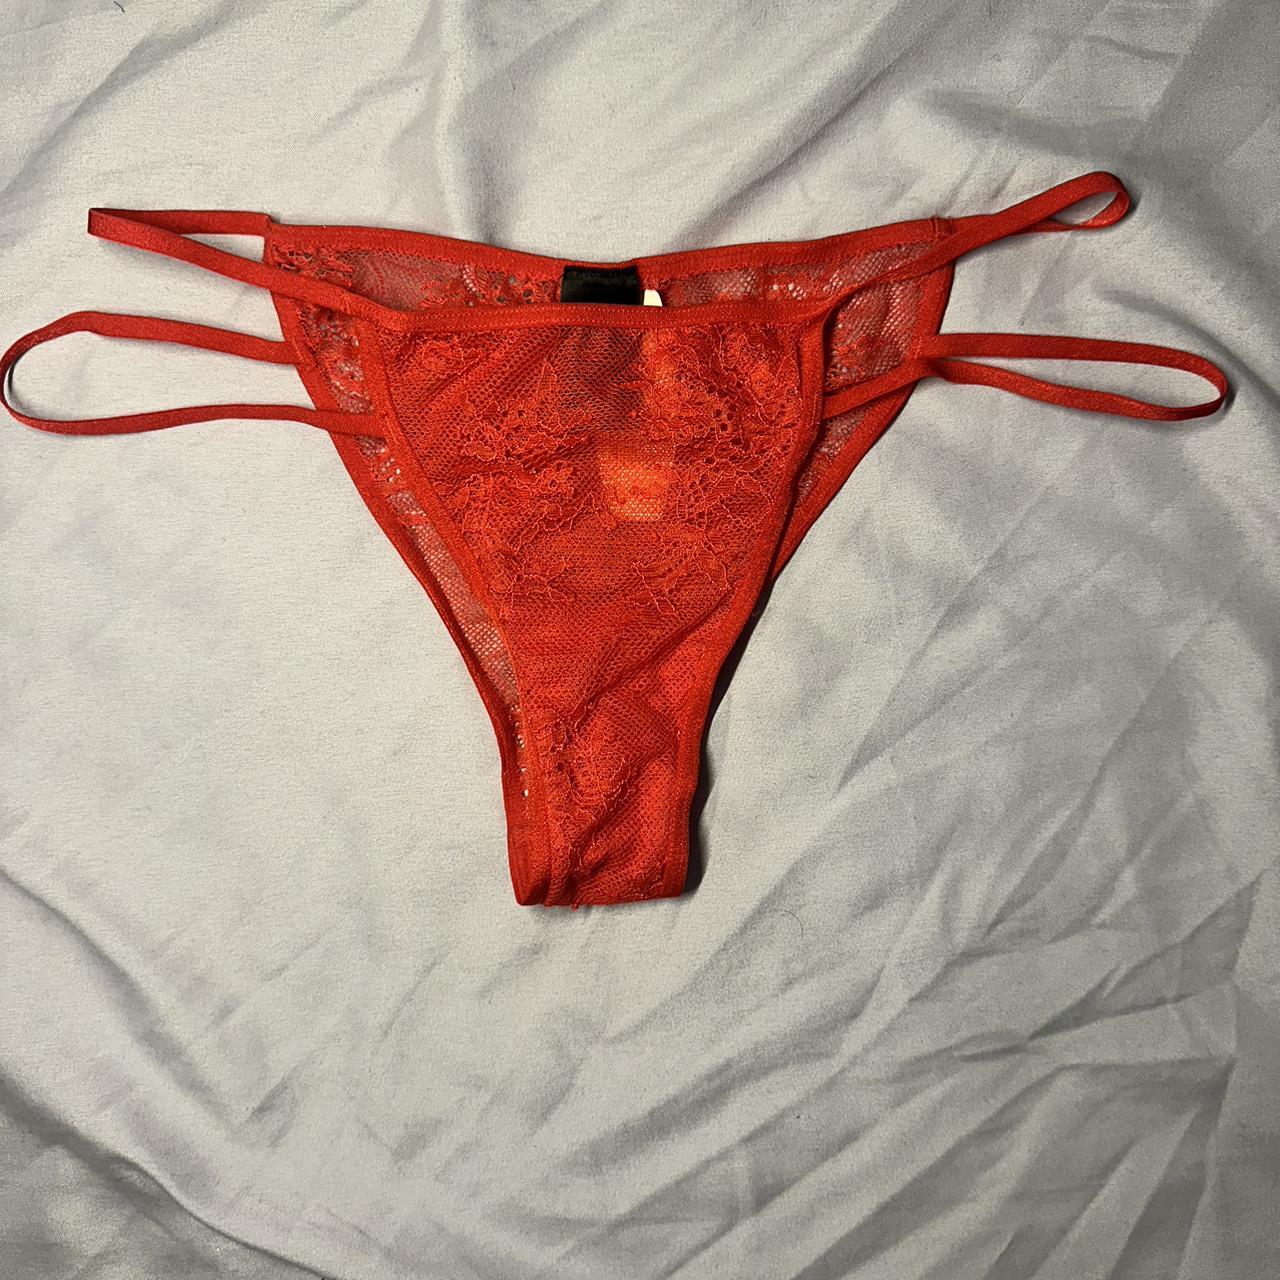 Mariemur Ruby Panties Size XL New with tags - Depop